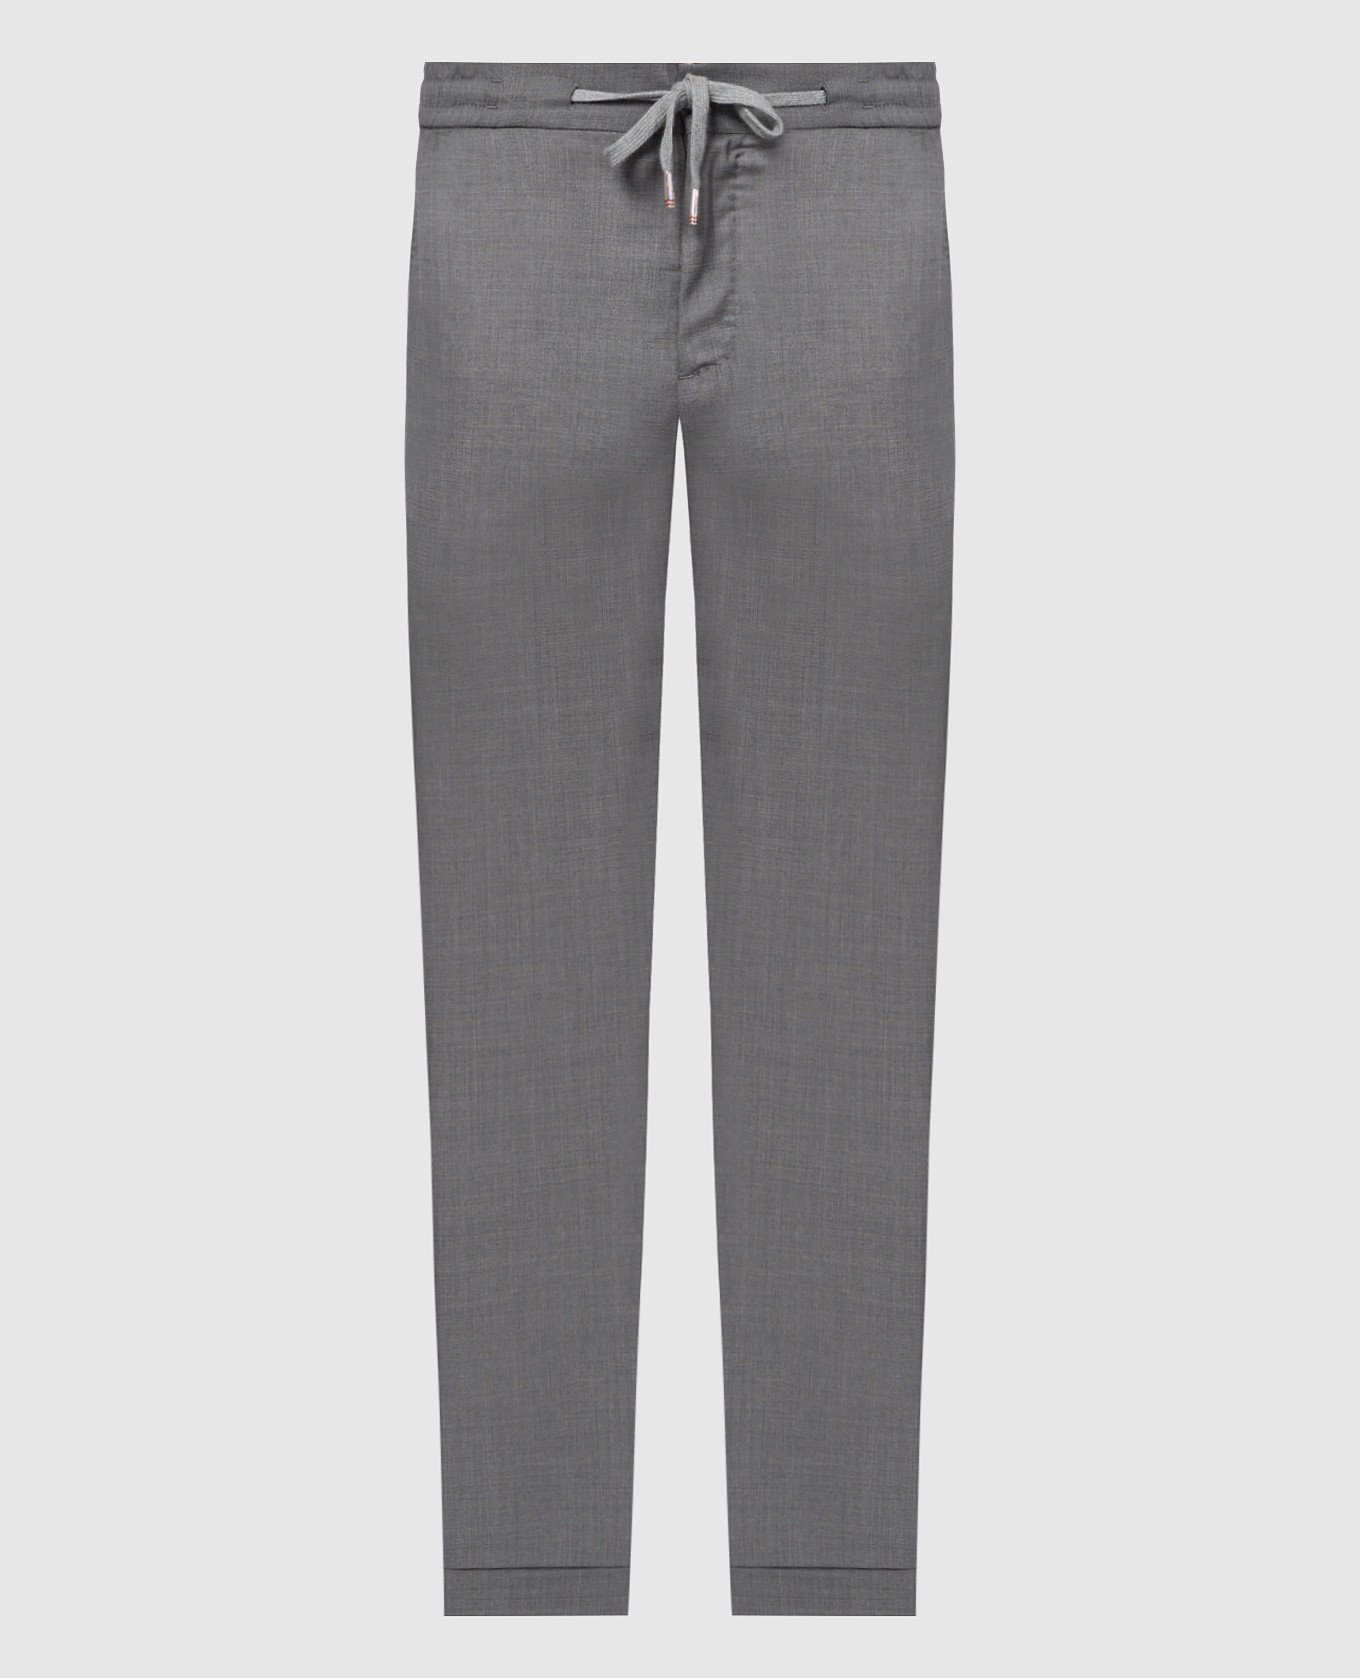 CARACCIOLO gray trousers made of wool and silk